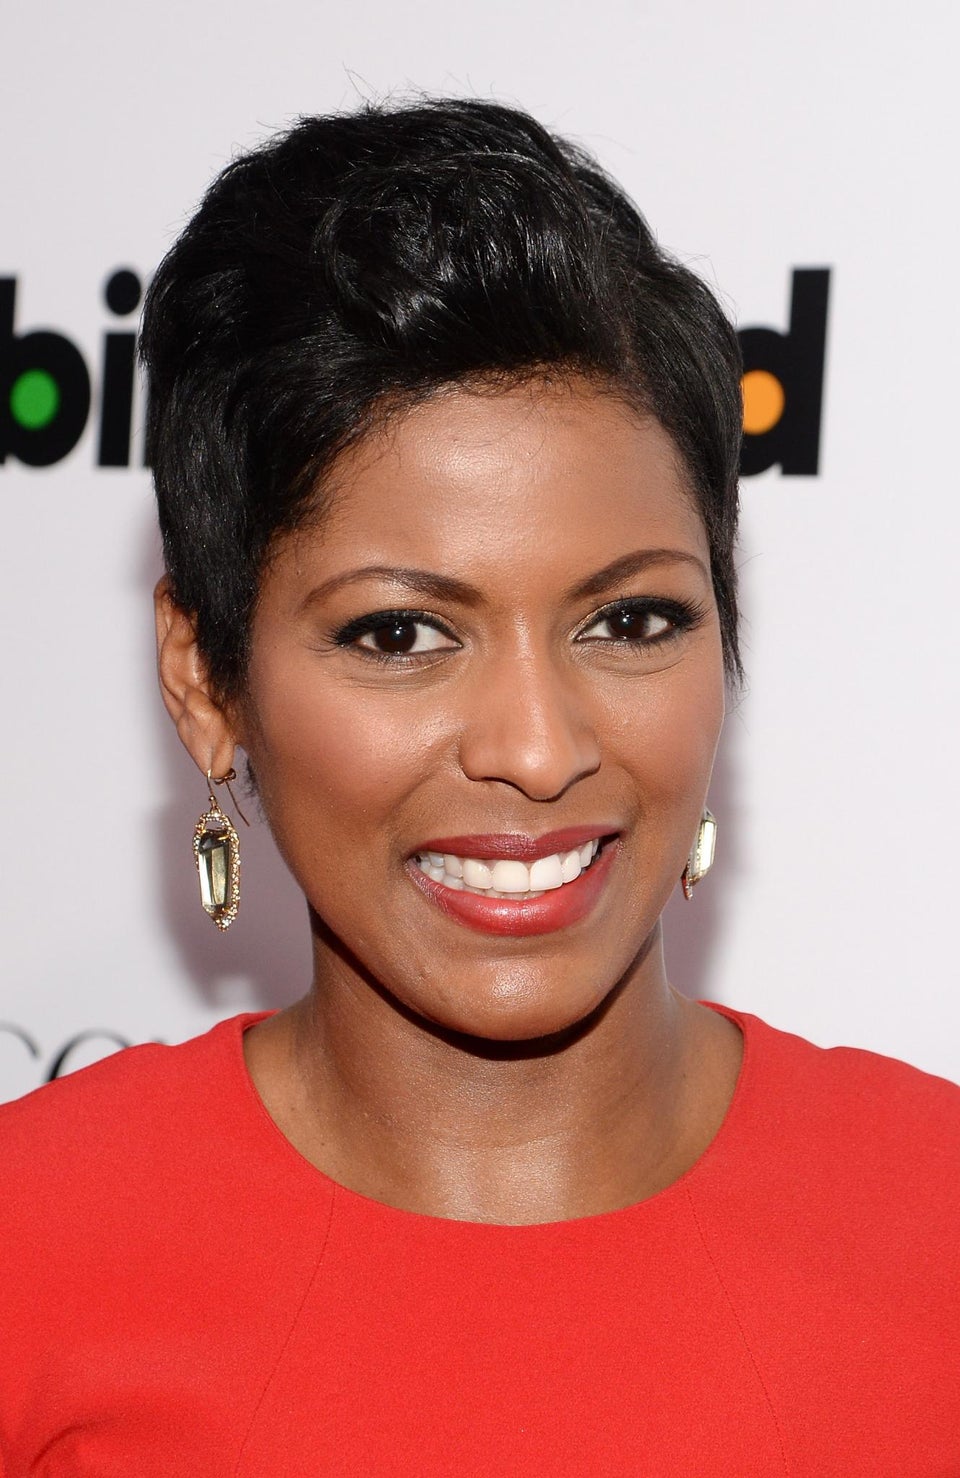 EXCLUSIVE: Tamron Hall on Being First Black Woman To Co-Anchor ‘Today’ Show